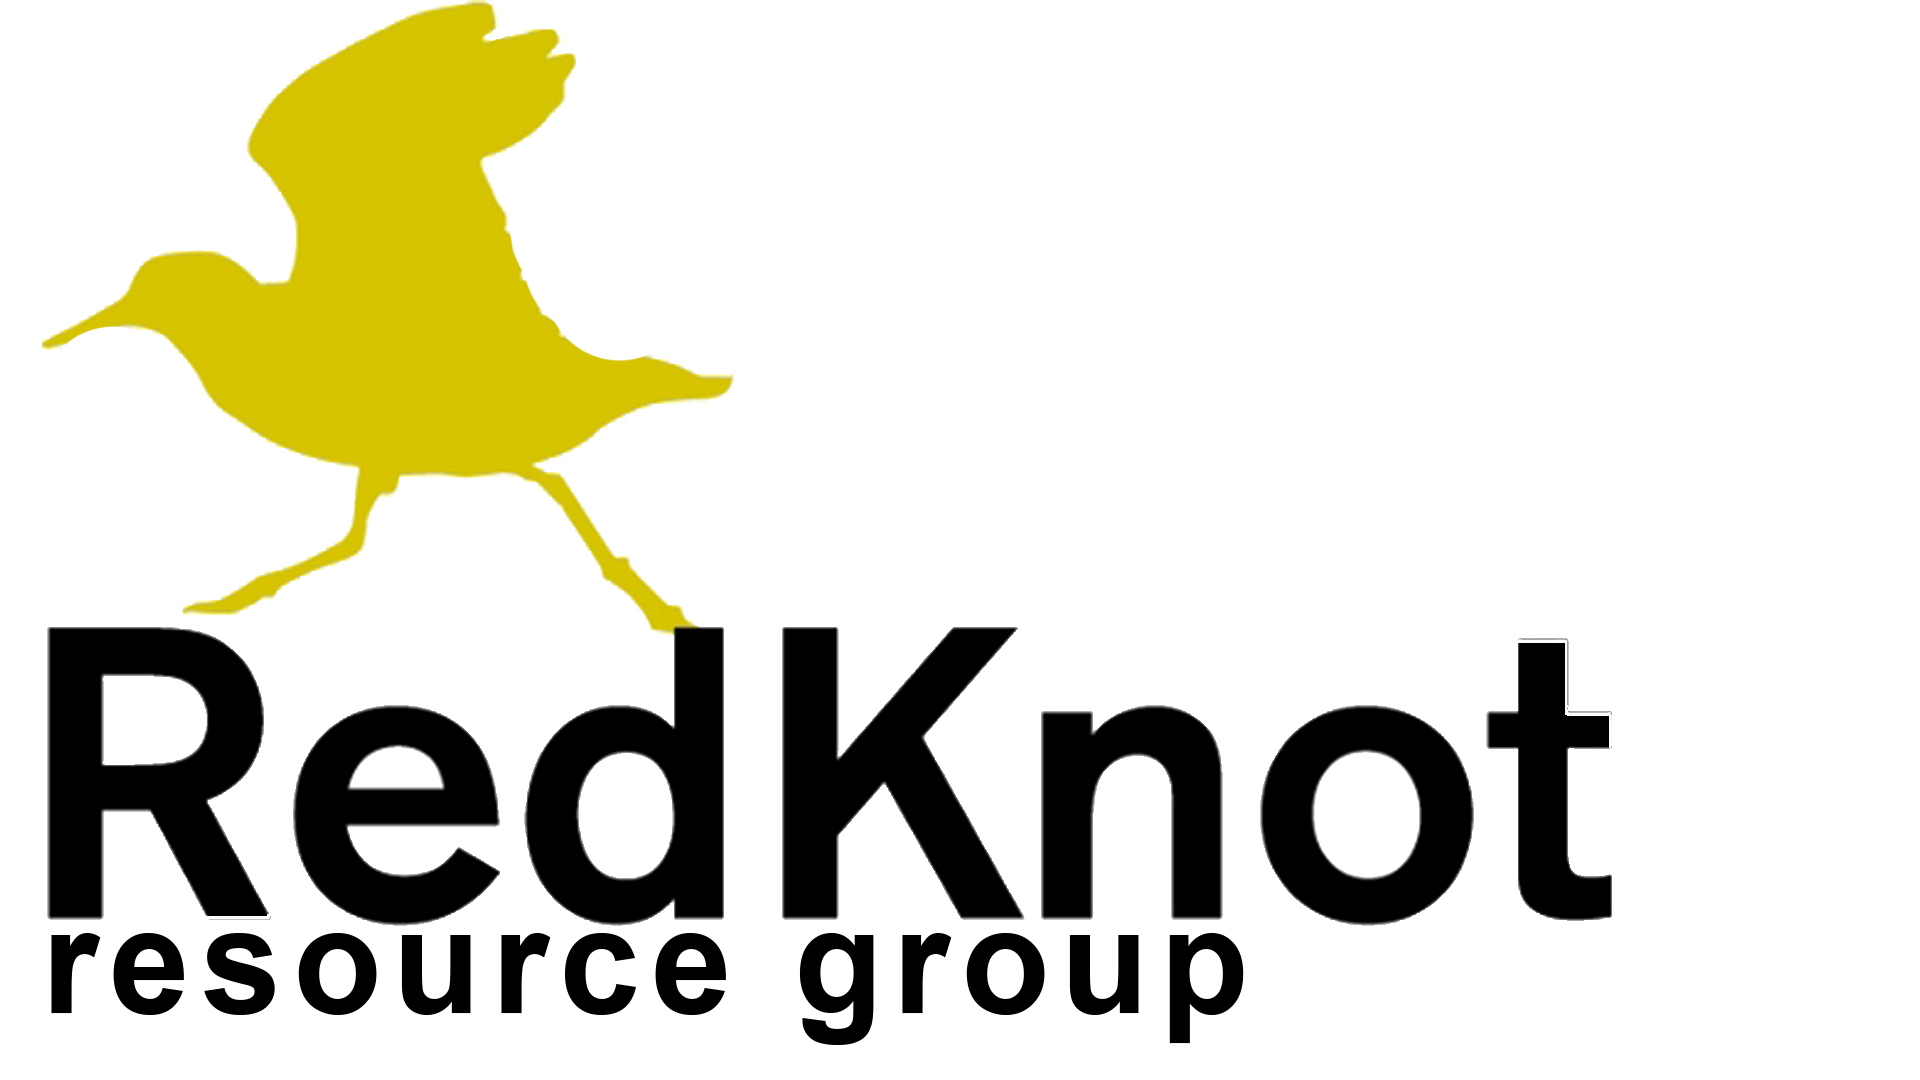 Red Knot Logo - RedKnot Resource Group